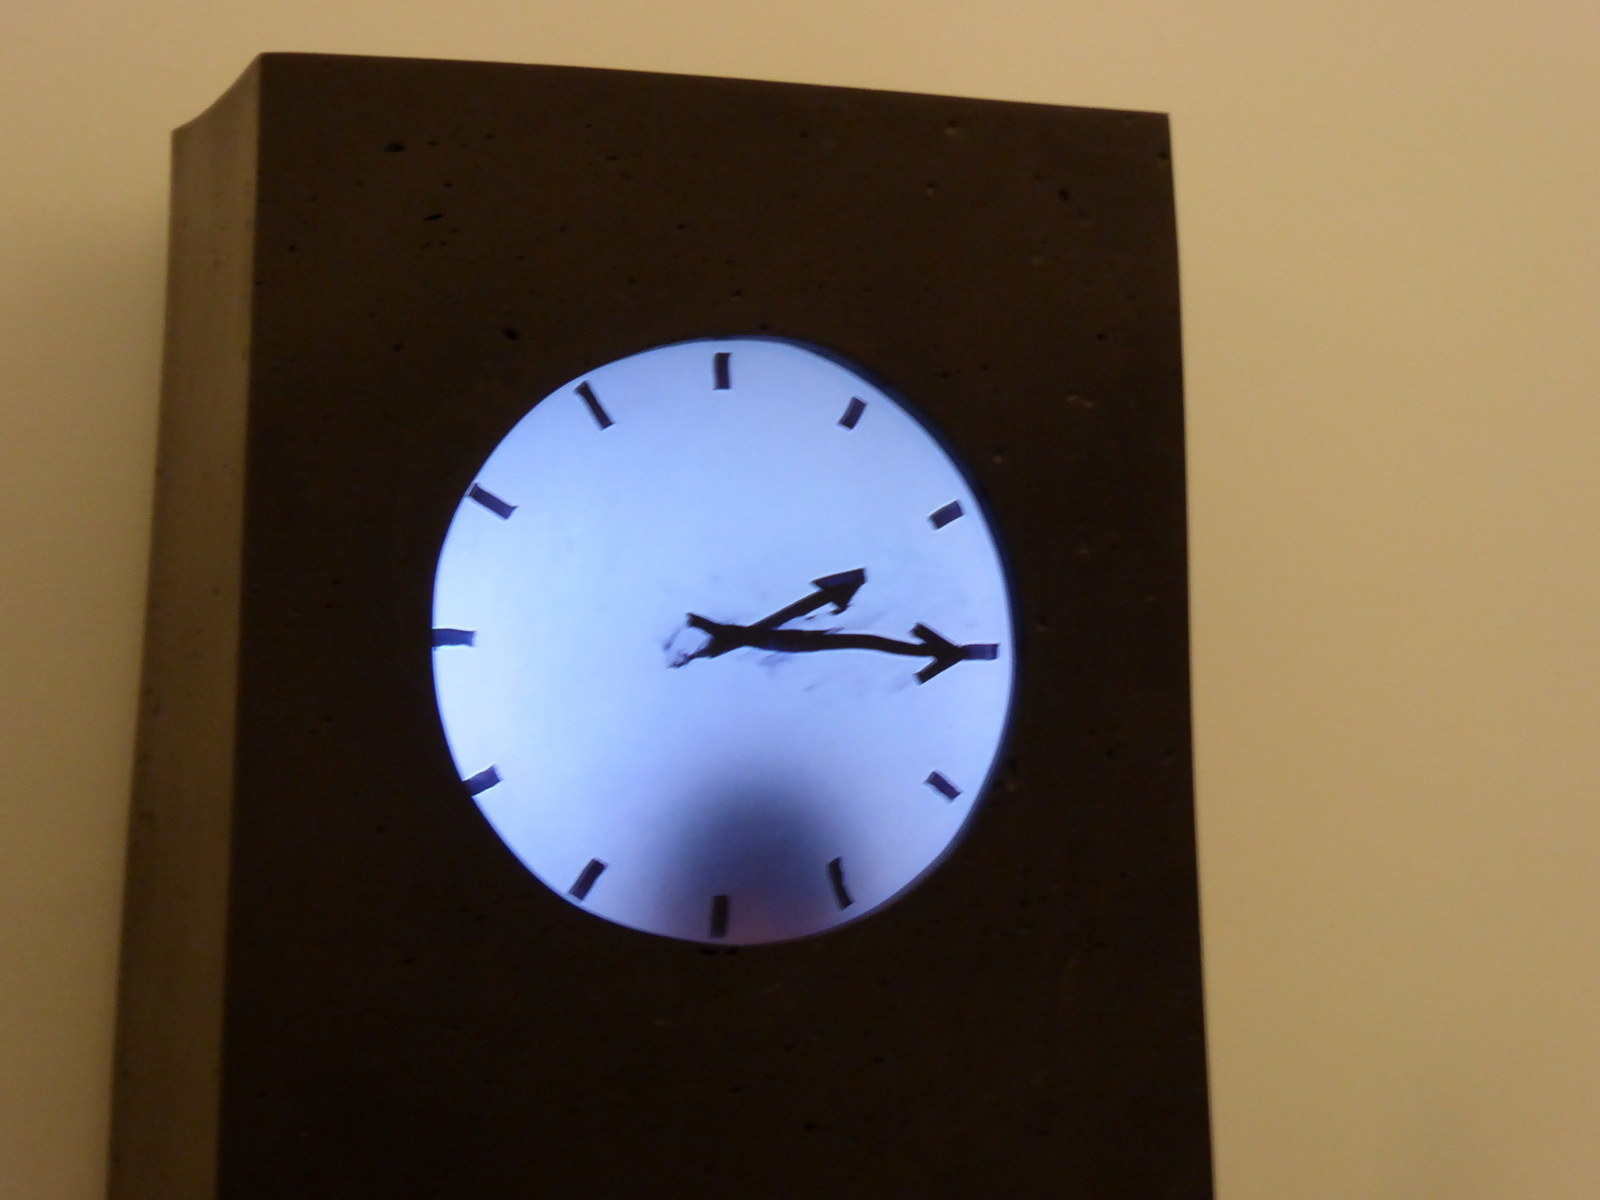 there is a clock on the wall showing time